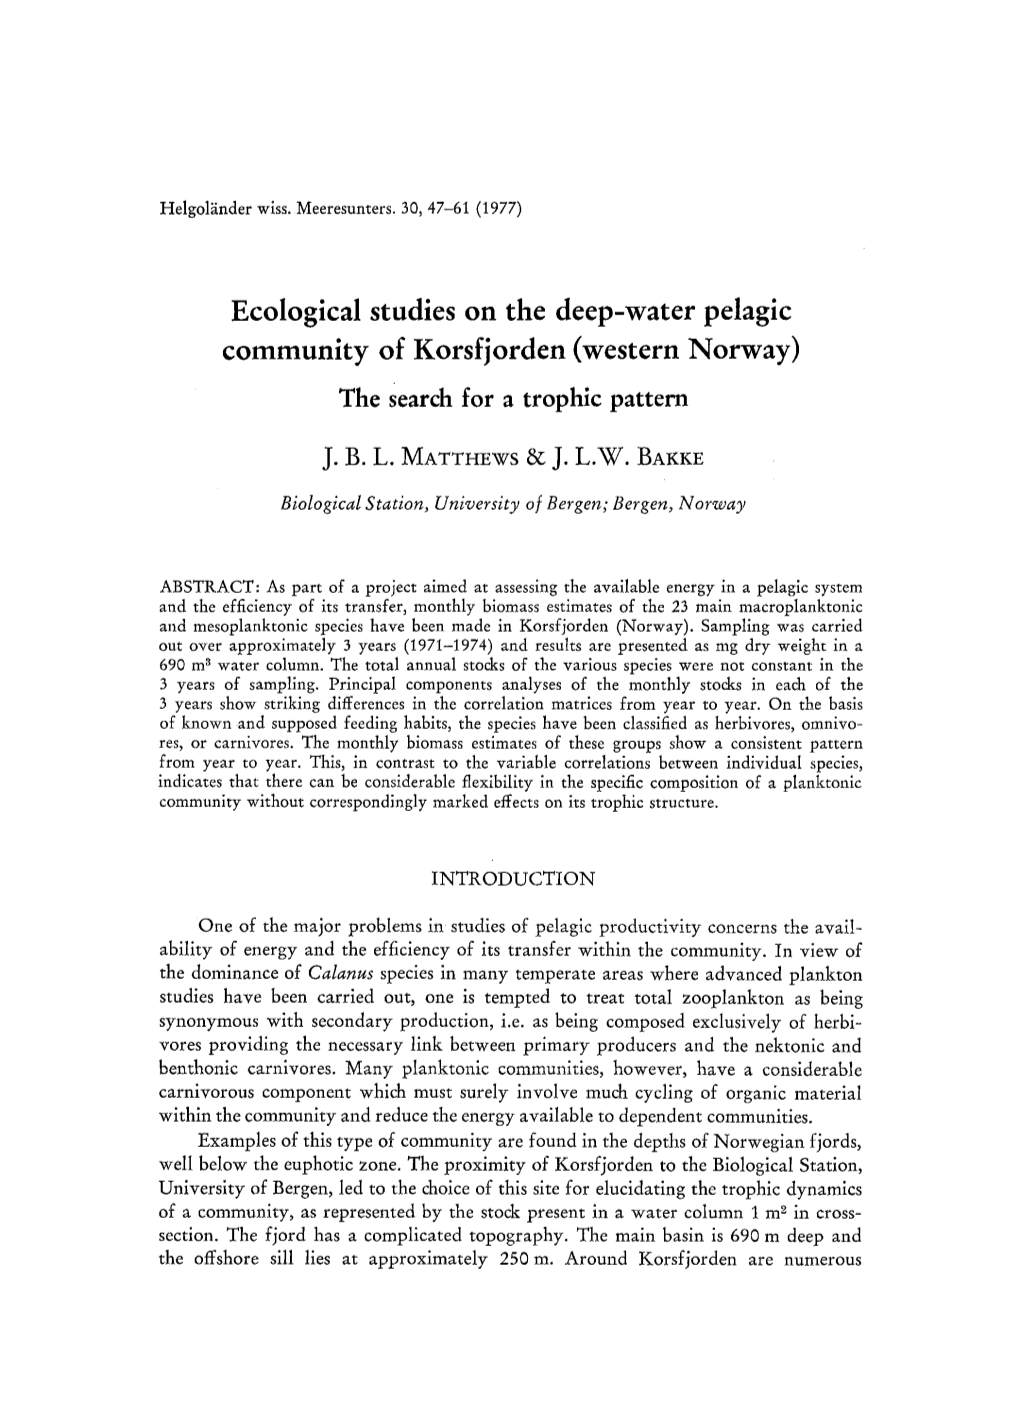 Ecological Studies on the Deep-Water Pelagic Community of Korsfjorden (Western Norway) the Search for a Trophic Pattern